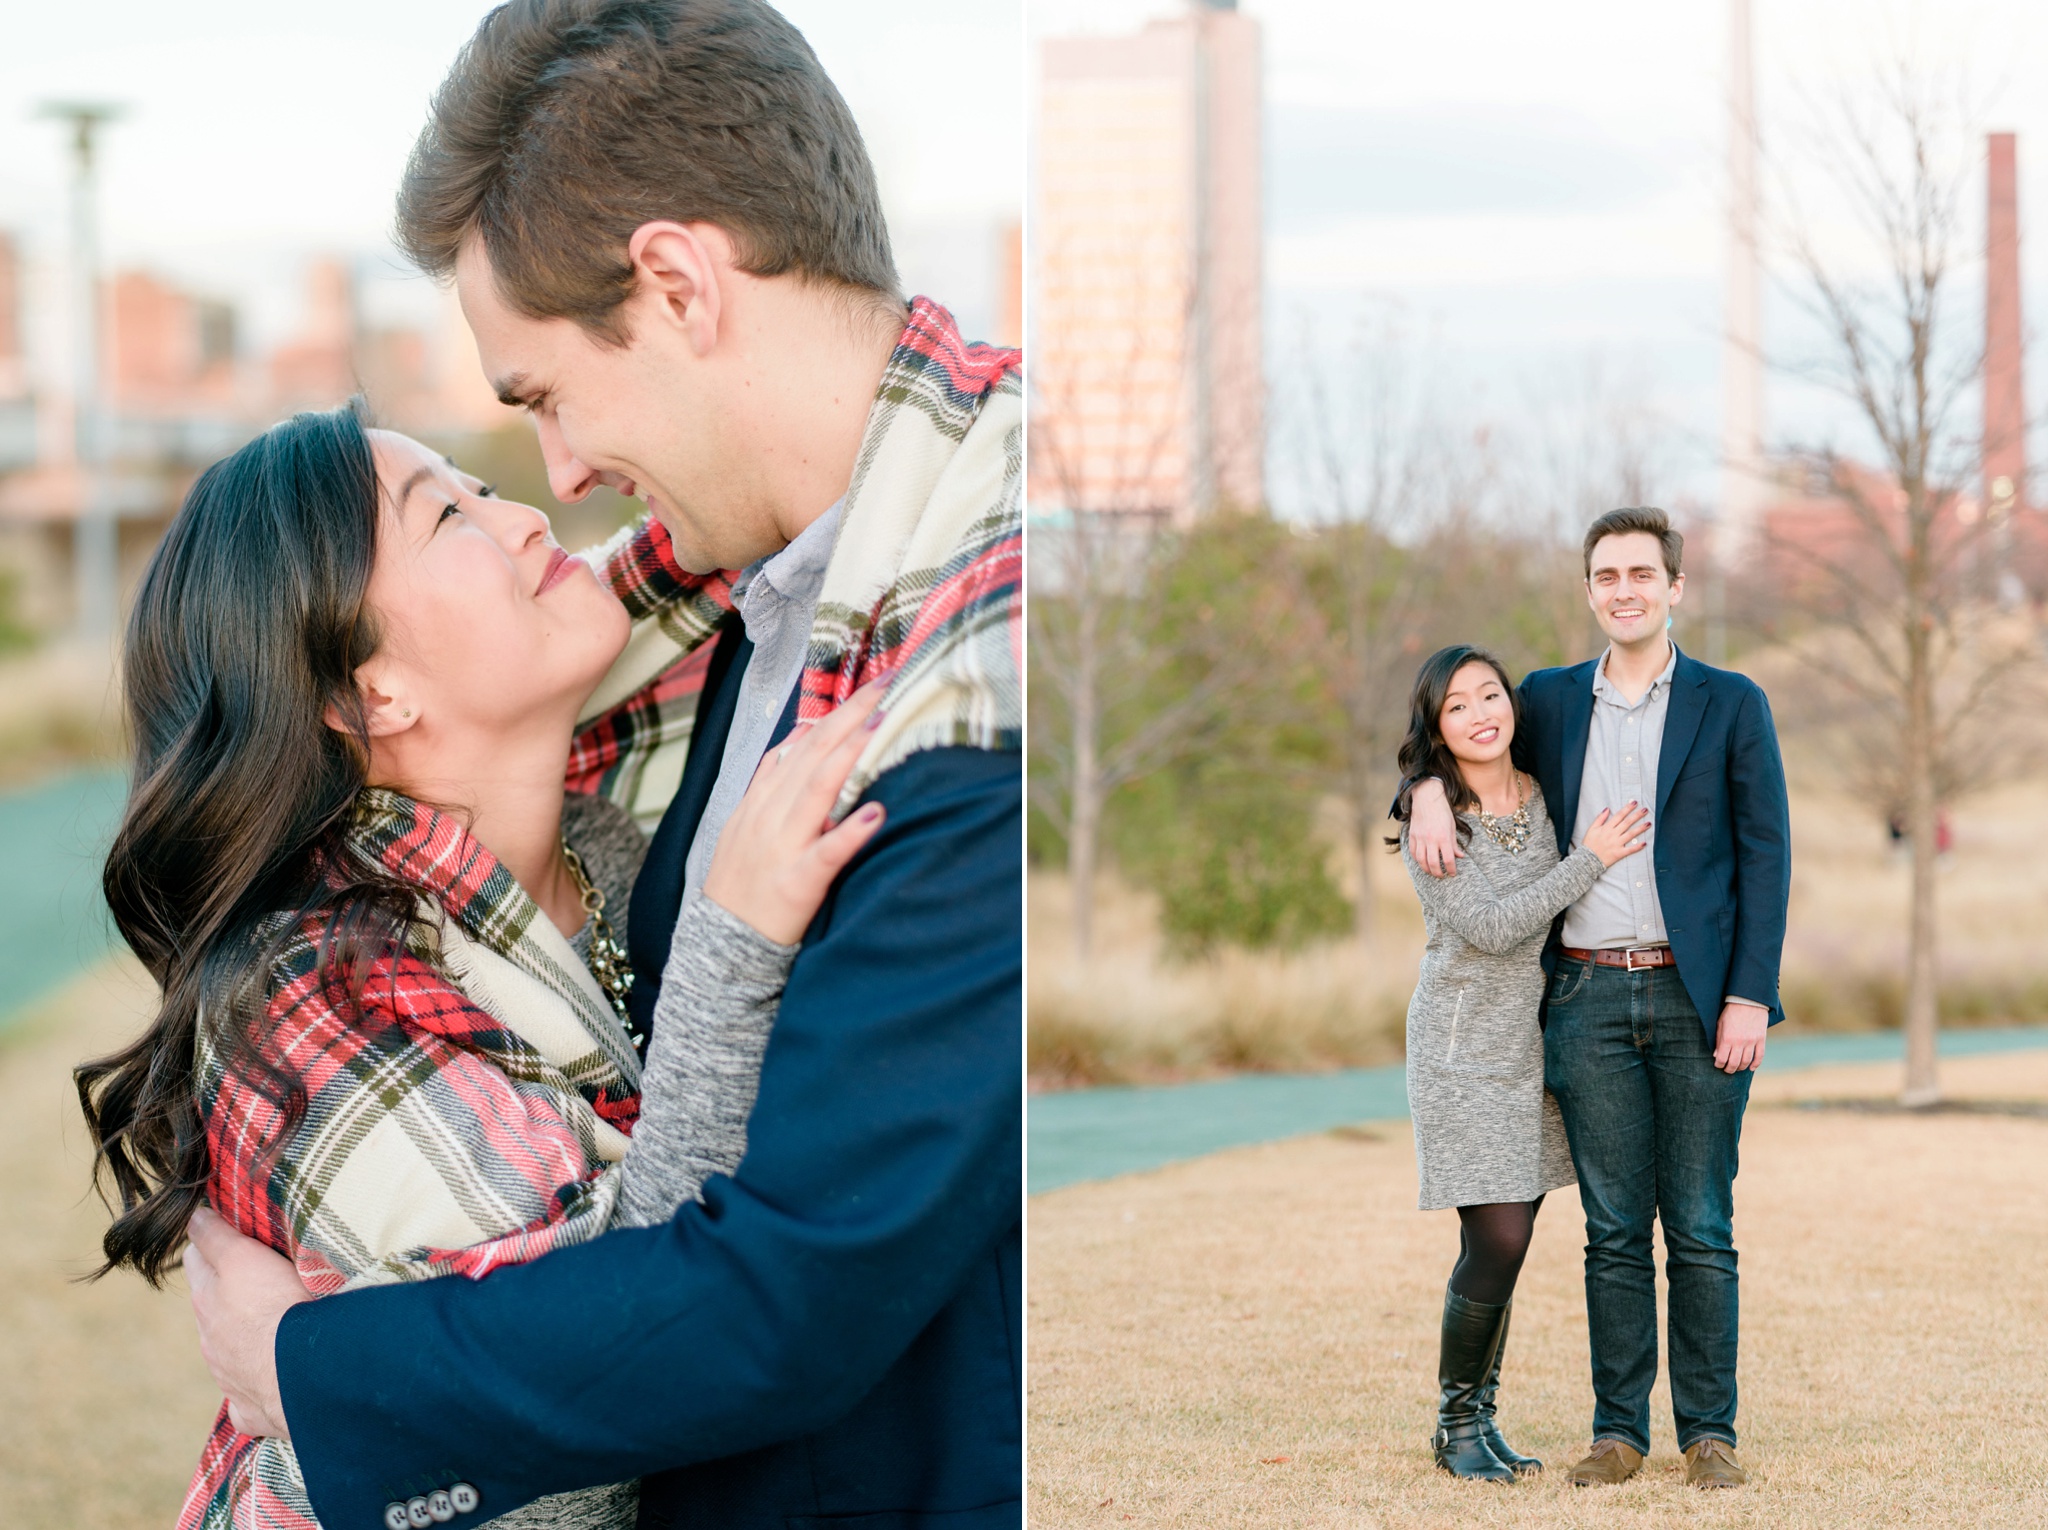 Downtown Nice to Have You in Birmingham Engagement Session| Birmingham Alabama Wedding Photographers_0025.jpg